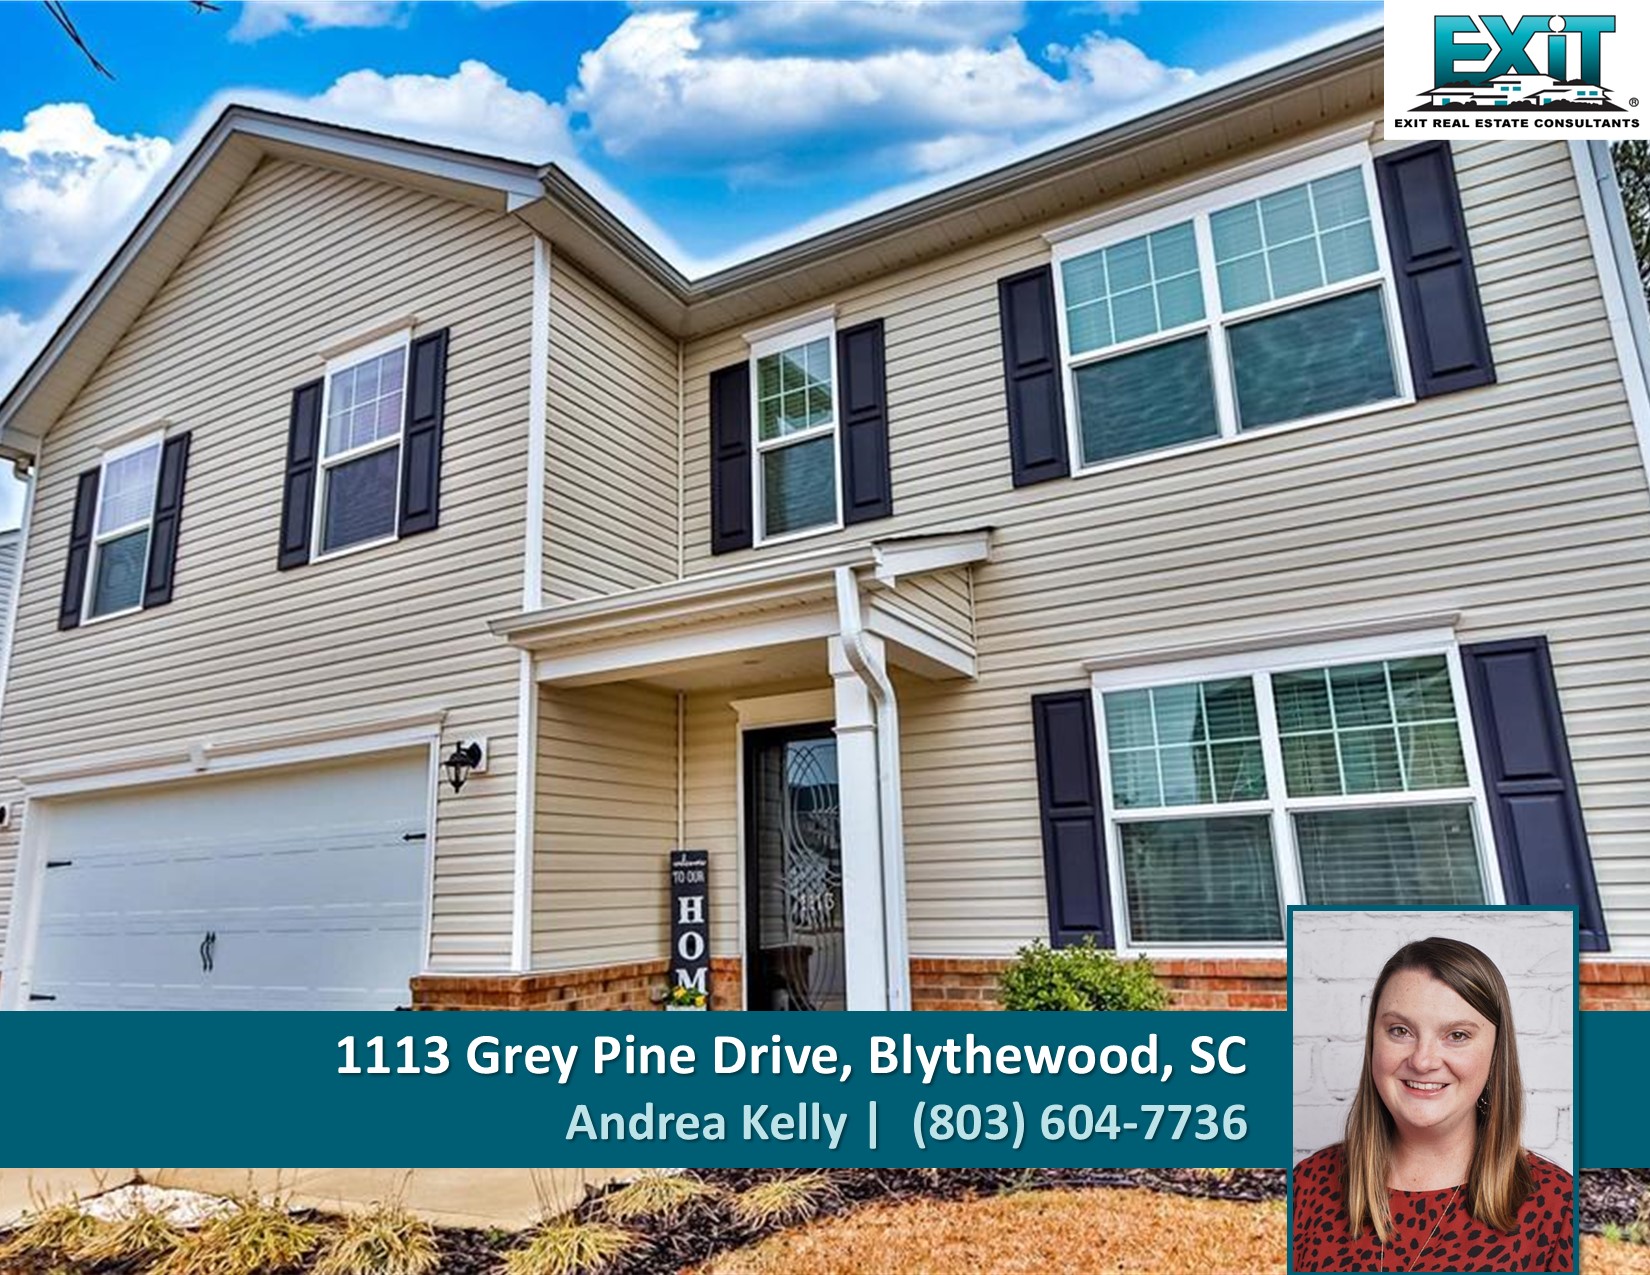 Just listed in Meadows at Summer Pines - Blythewood